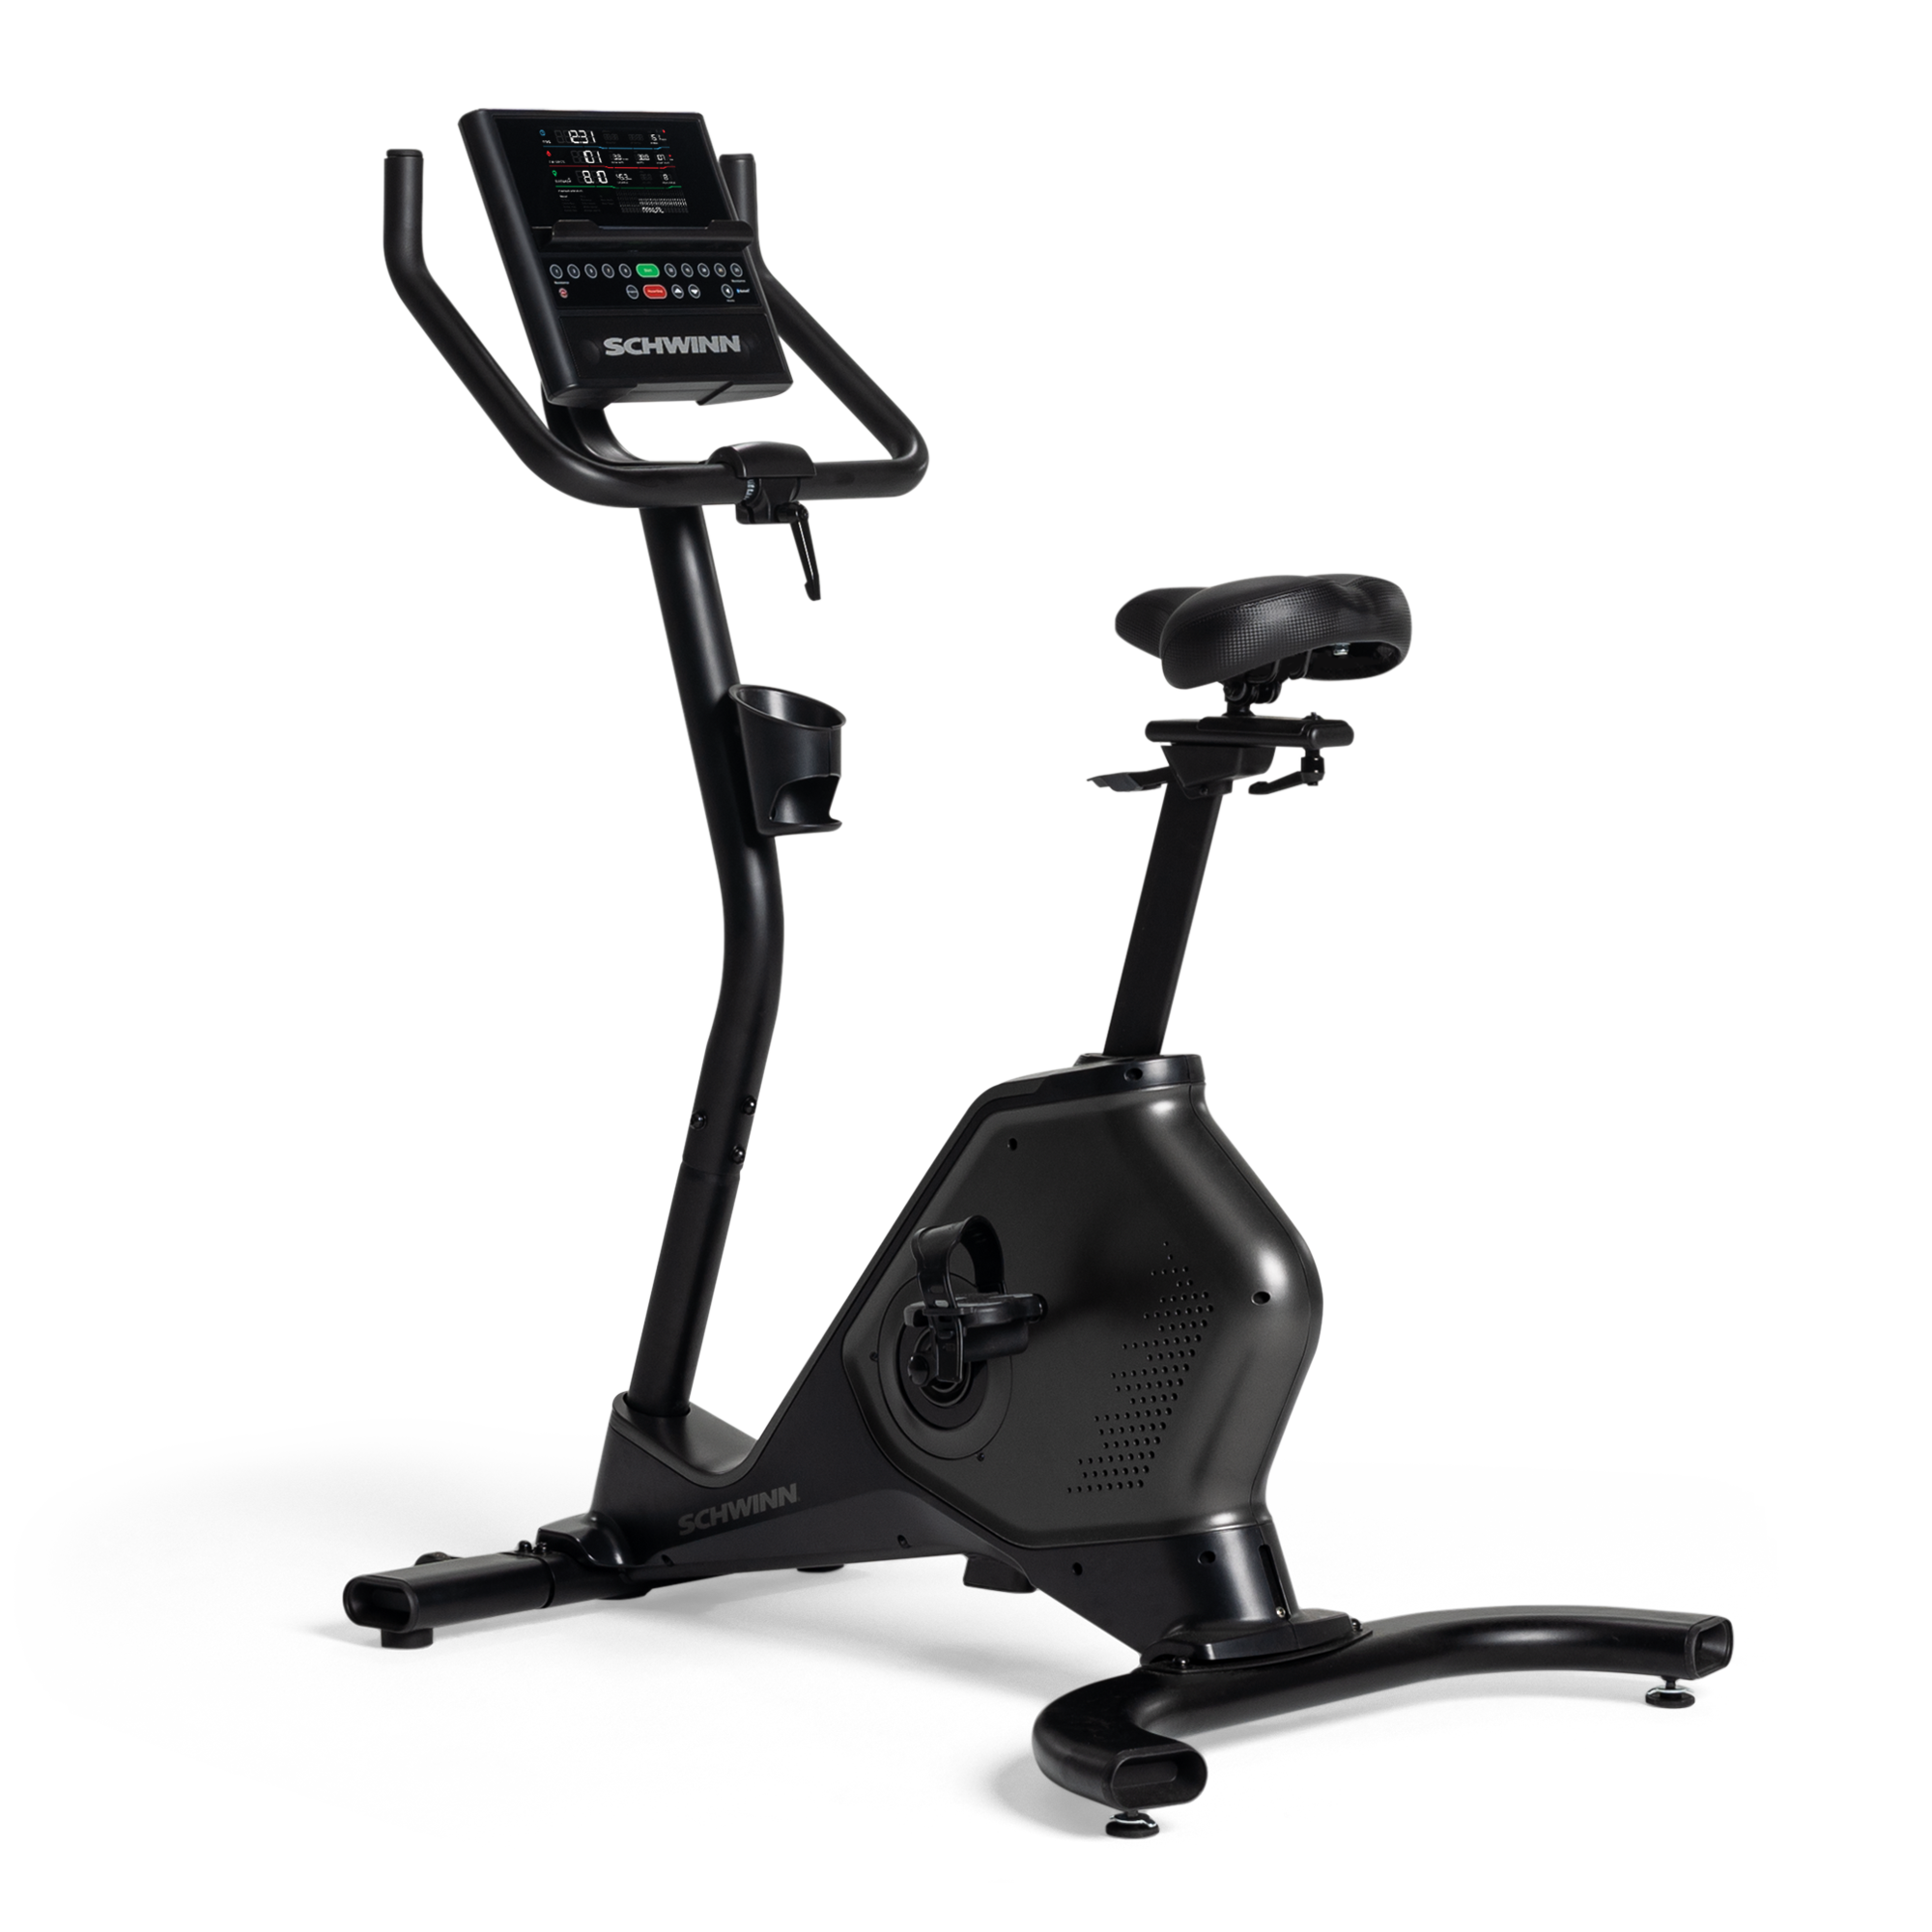 Upright Bikes - Sit Up and Enjoy the Ride